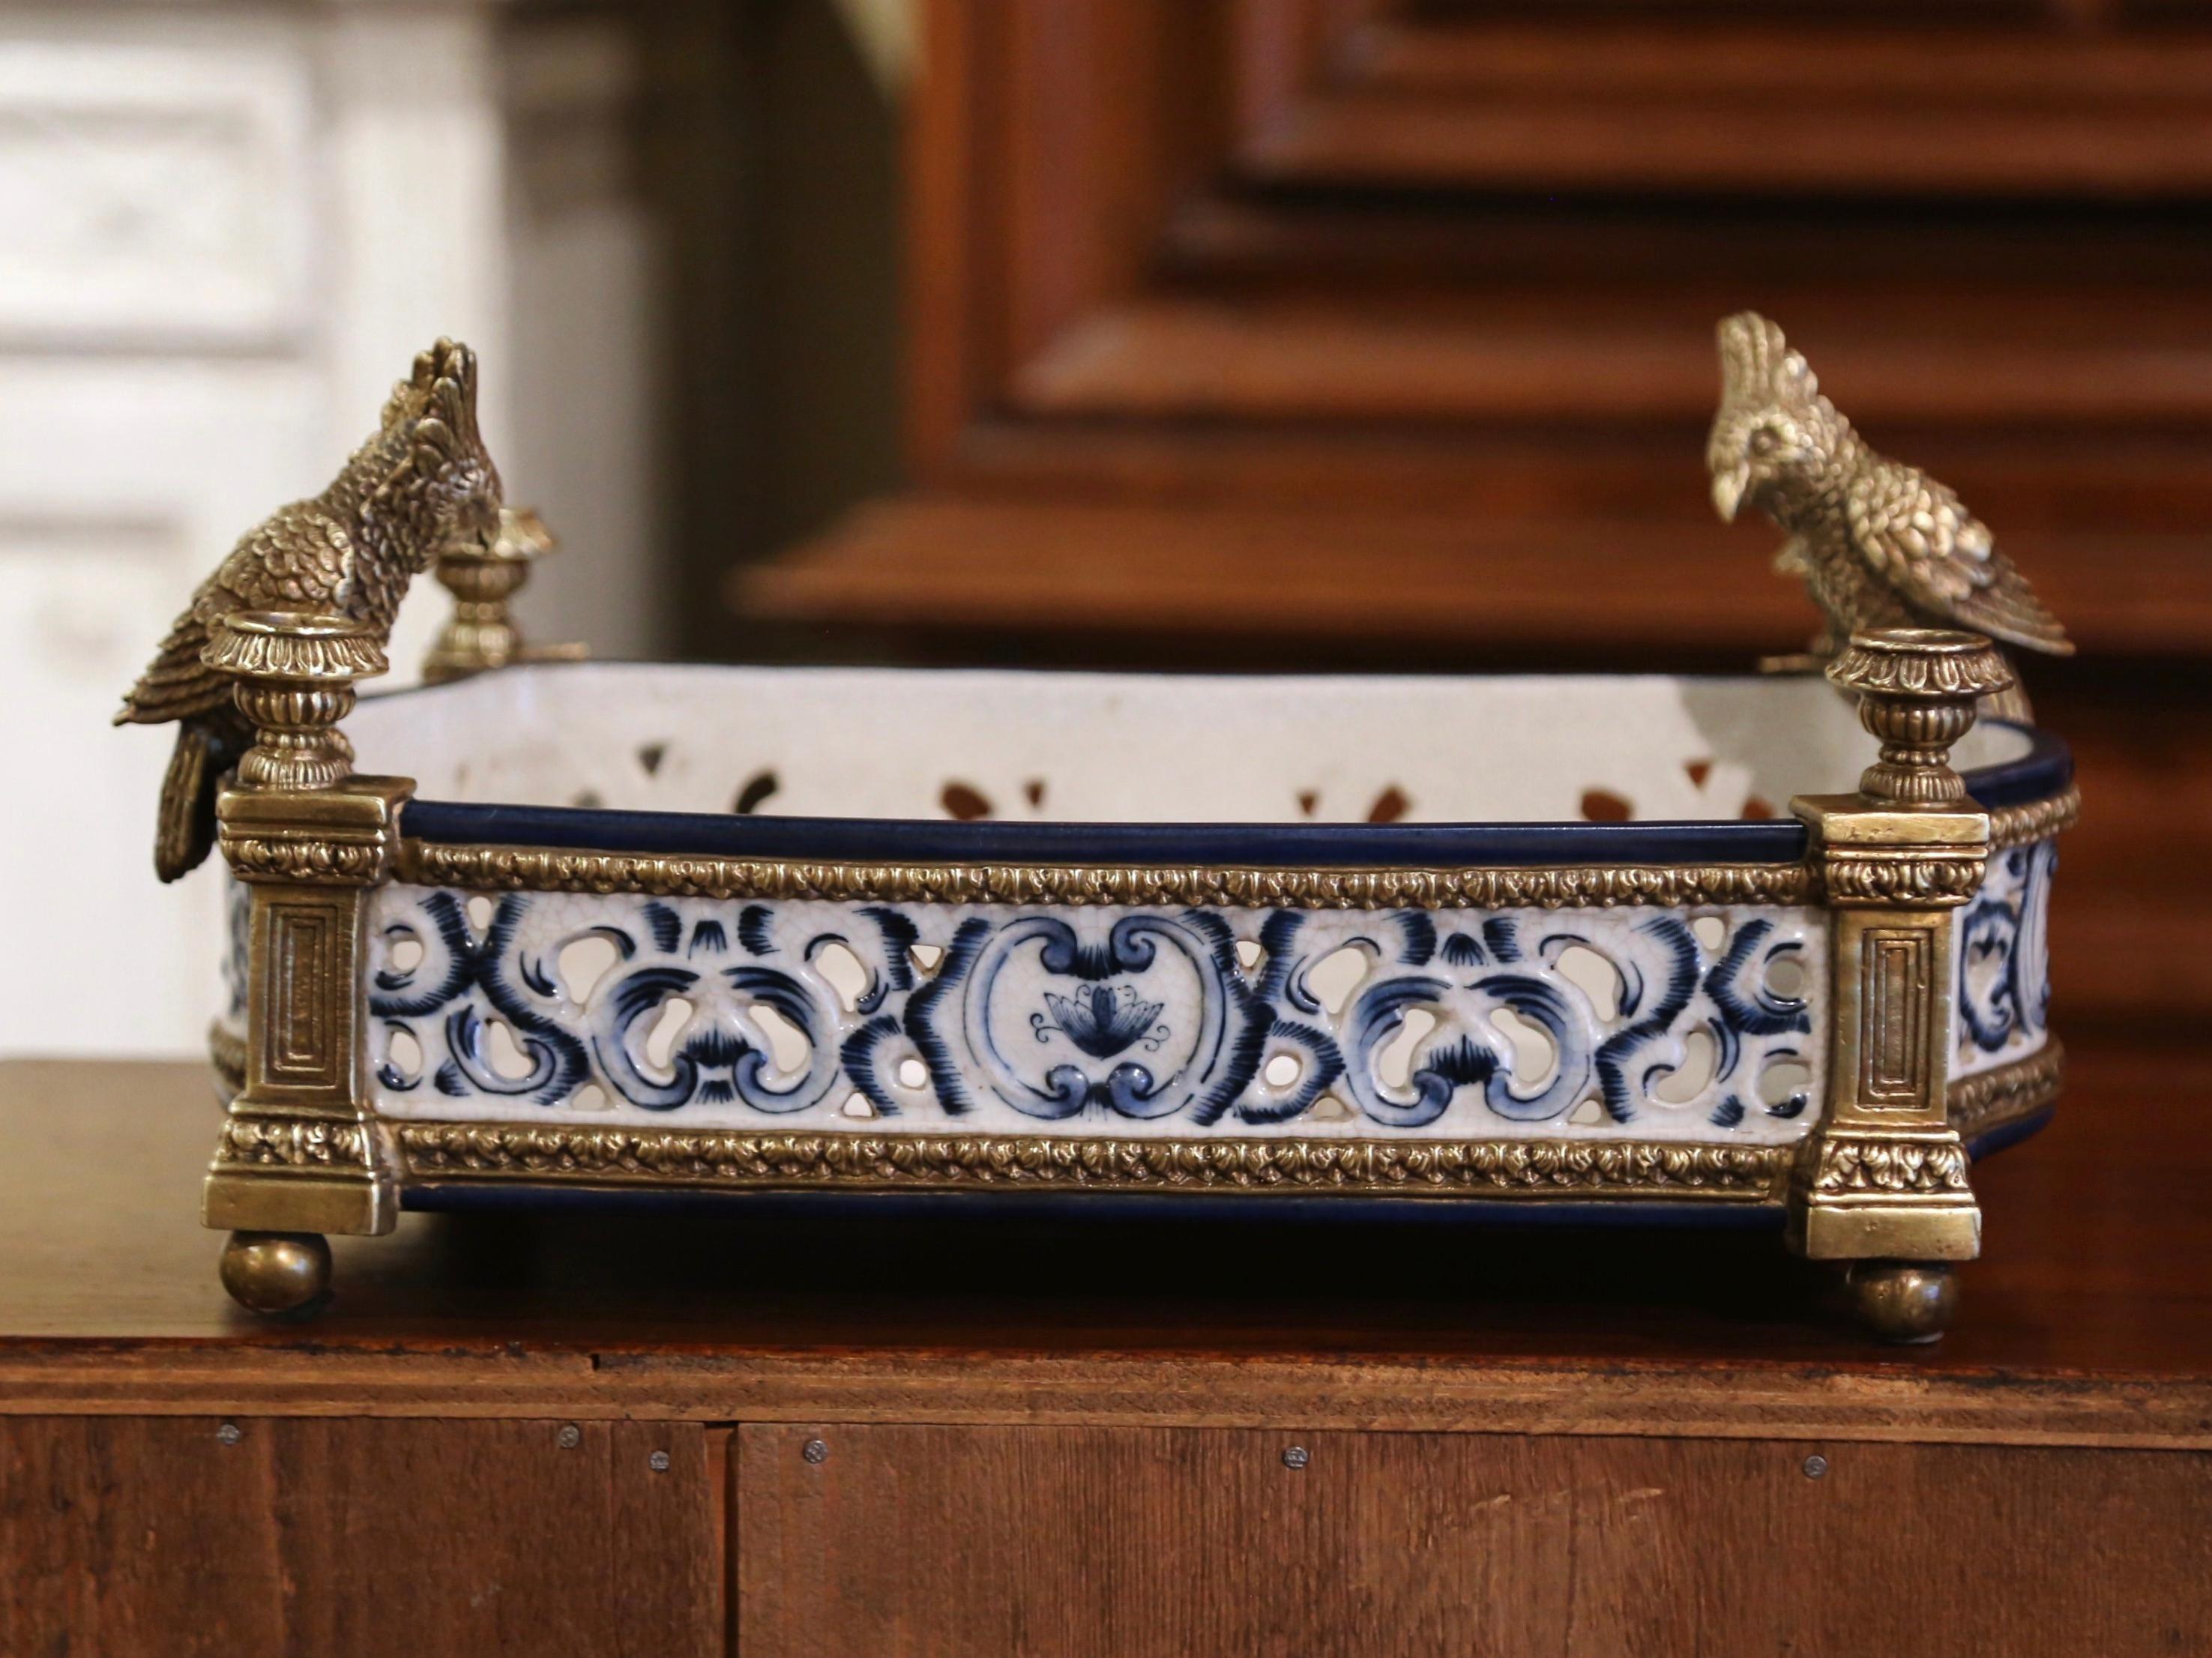 Decorate a dining room table or dress a console with this elegant antique centerpiece. Crafted in Italy circa 1920, the colorful dish stands on bronze round feet over side columns. Rectangular in shape with bombe sides, it features a blue and white